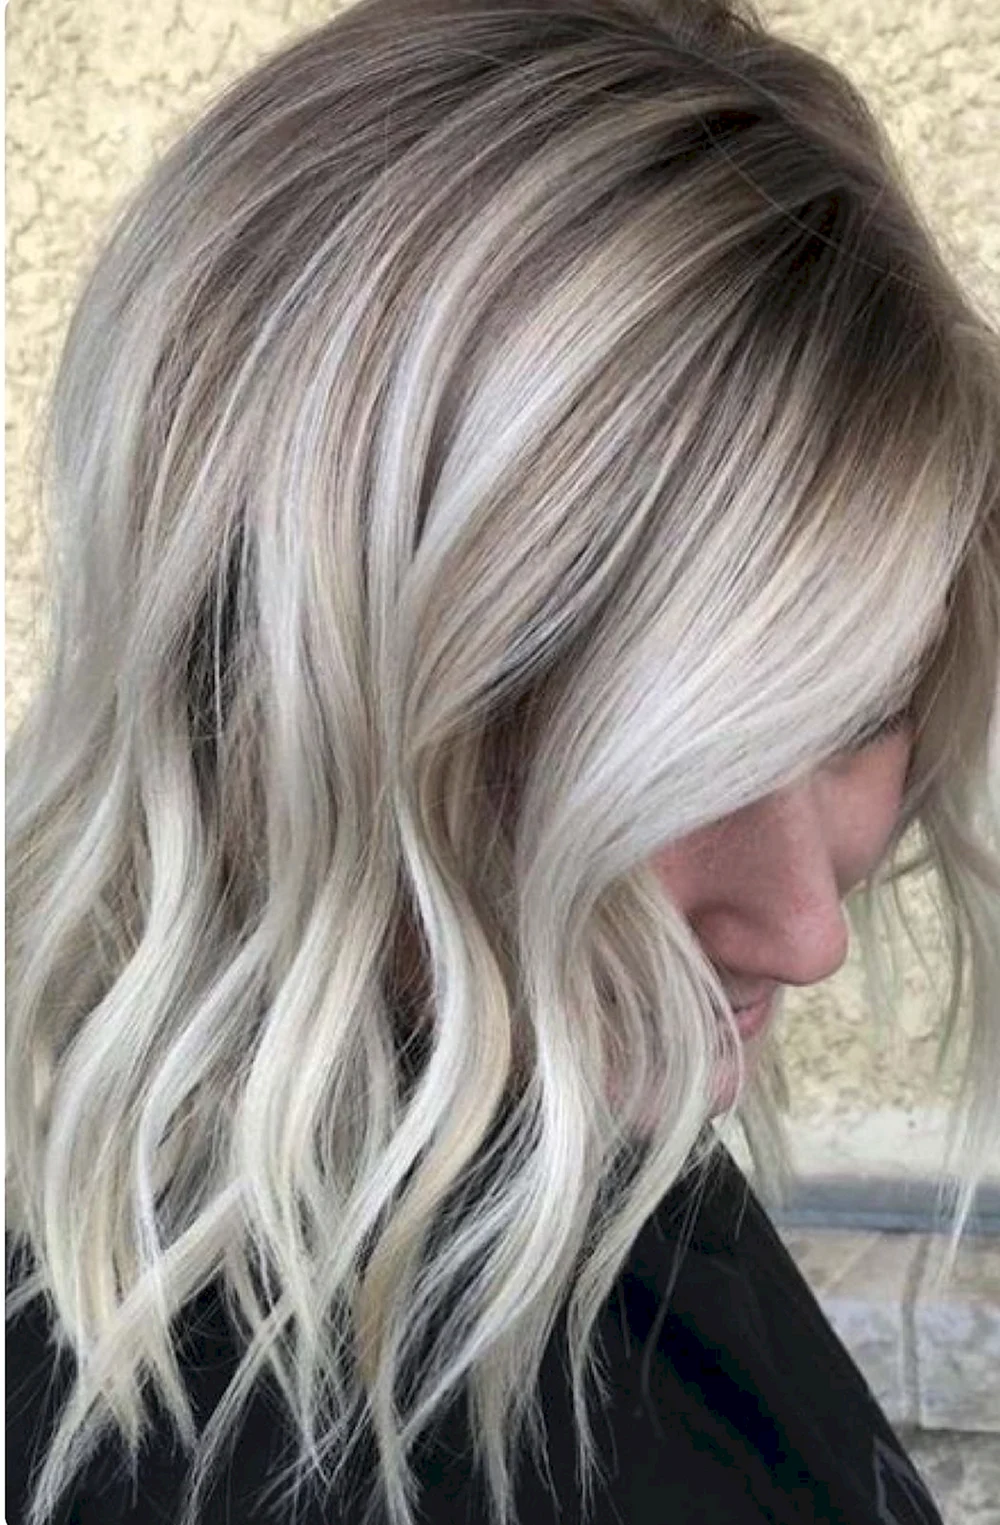 Ice blonde hair Colors